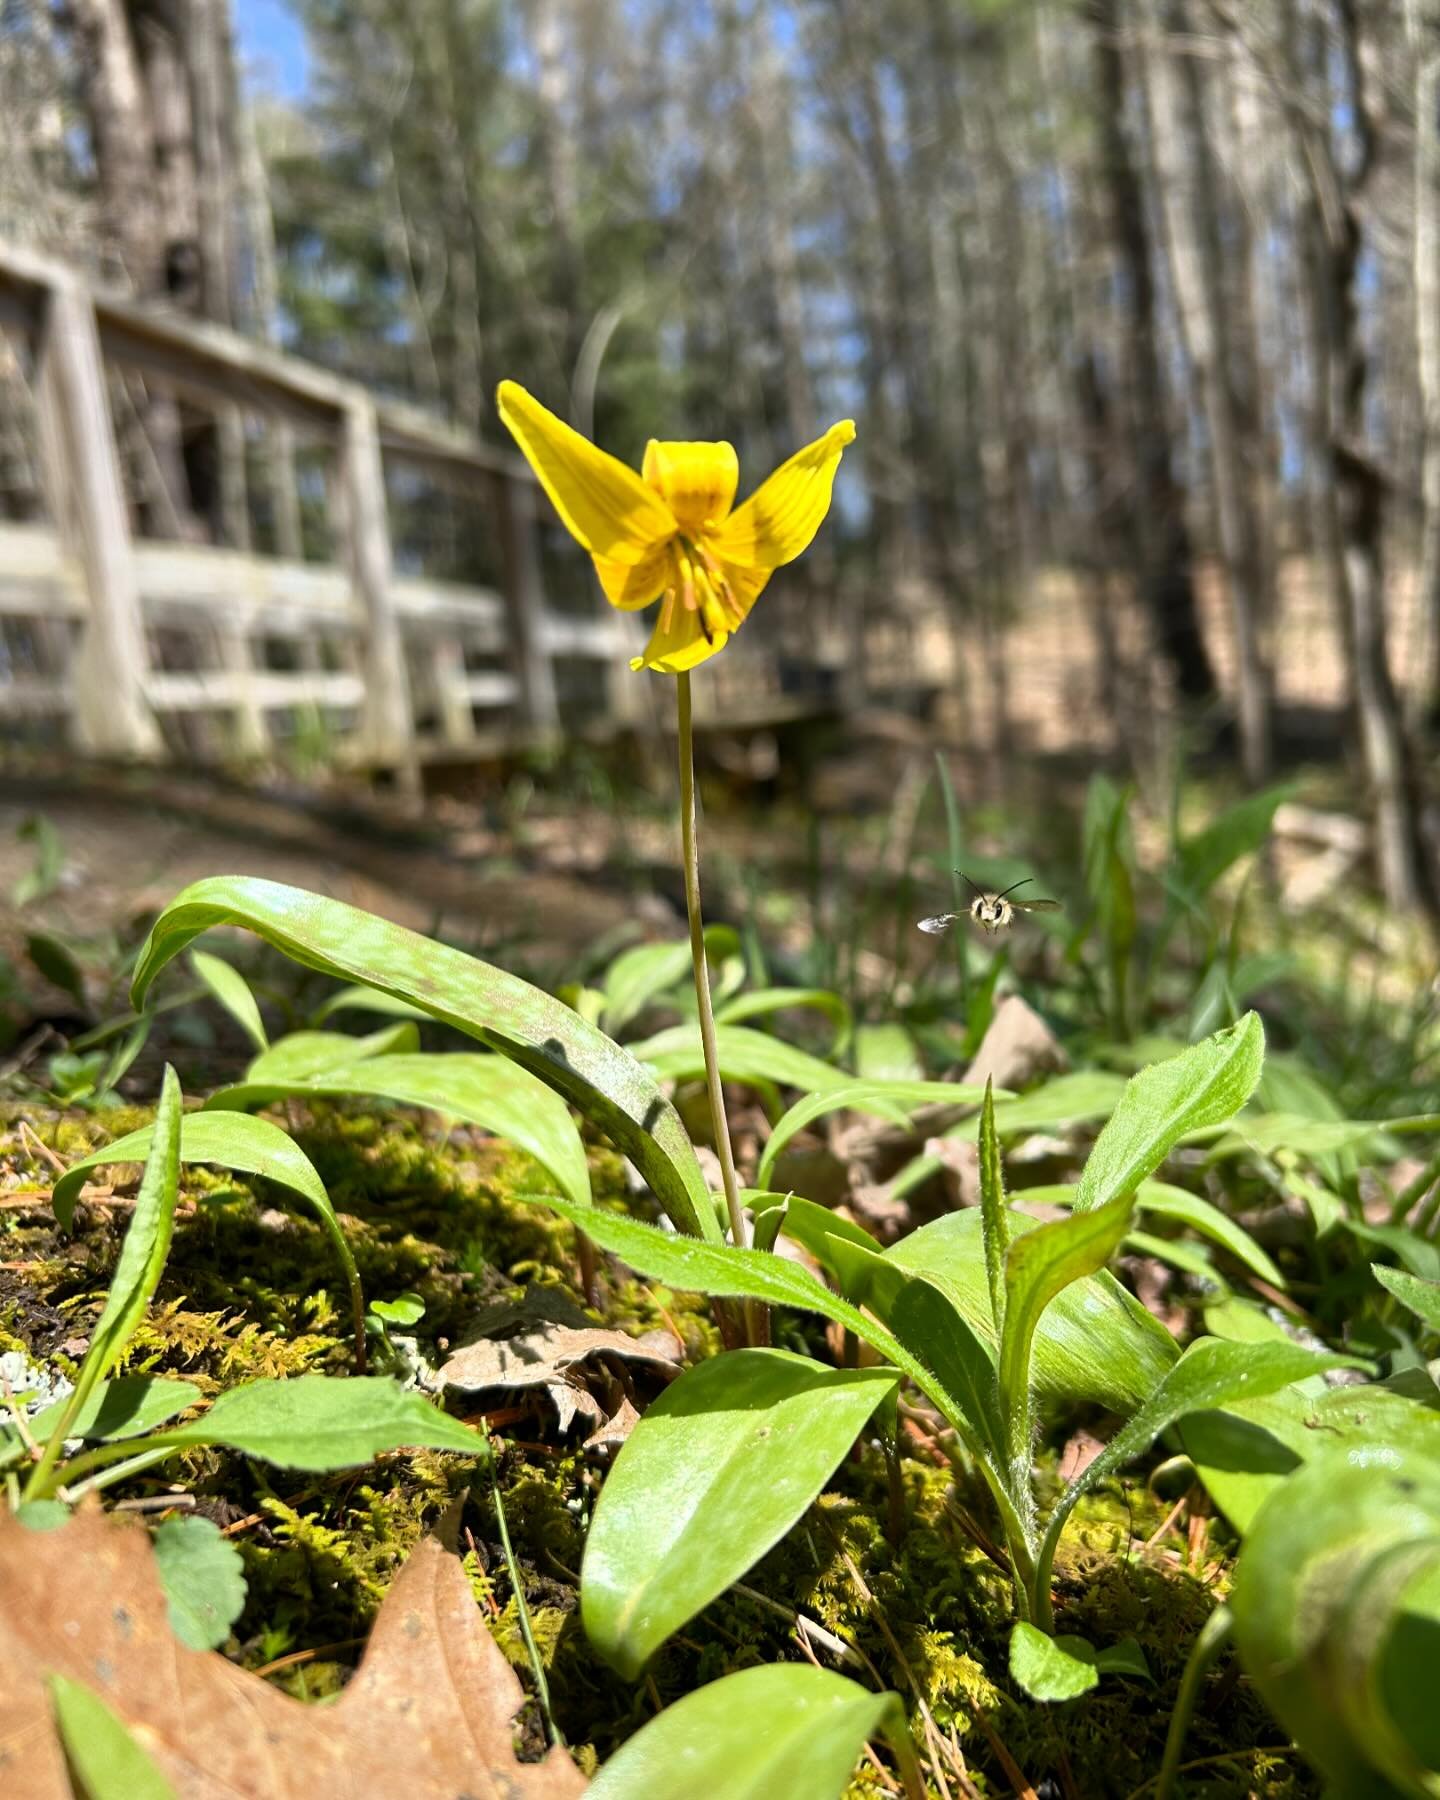 It&rsquo;s so nice to see some color returning to the landscape! These spring ephemerals are early-rising wildflowers that bloom for a few short weeks in the forest each spring. Head out for a hike soon to see them before they return to a dormant sta